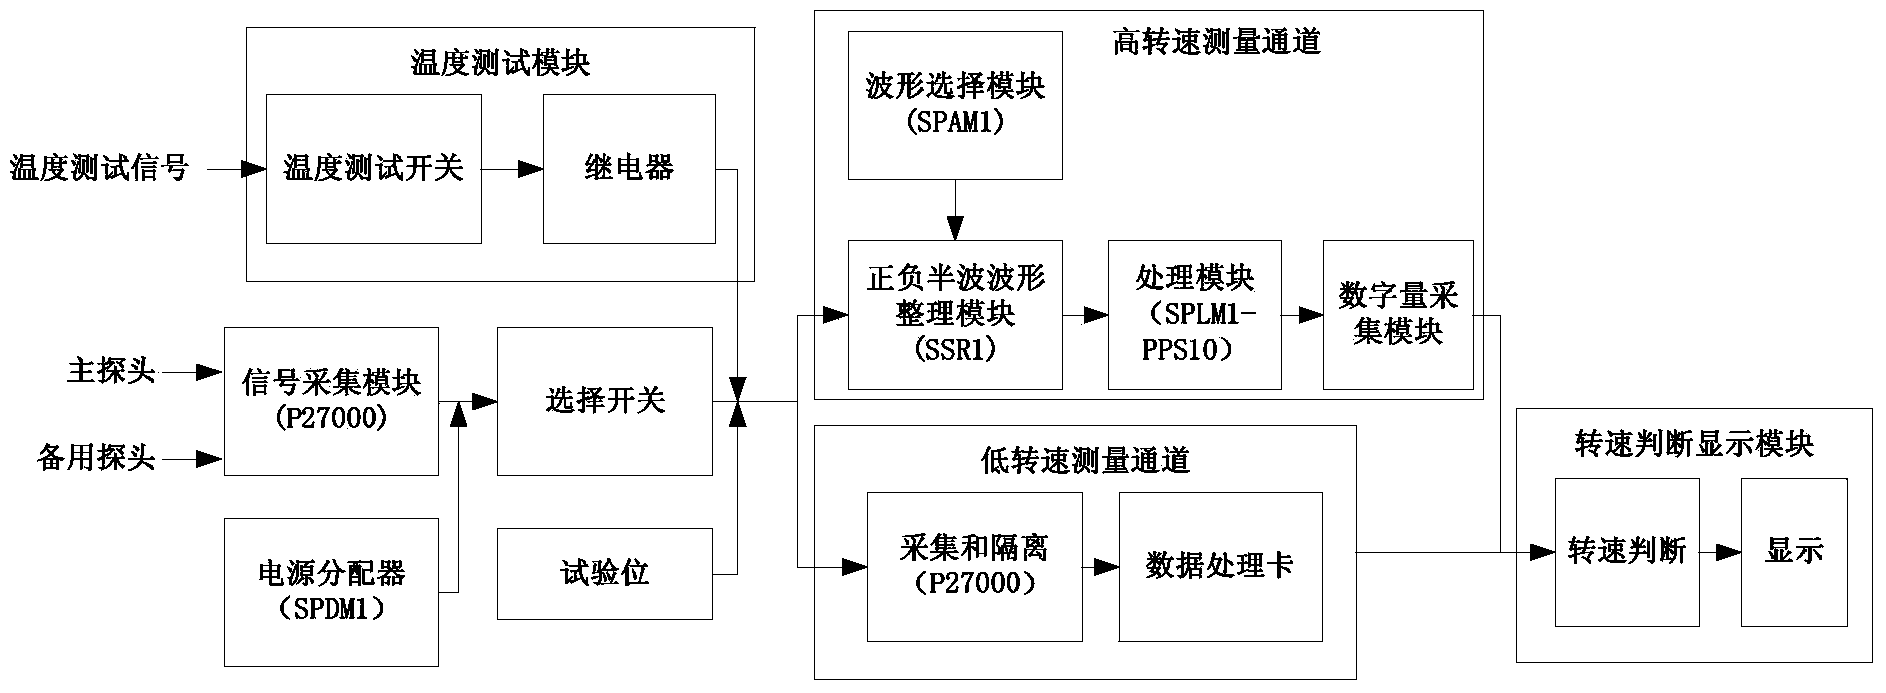 Control system for main pump measurement circuit of digital nuclear power station